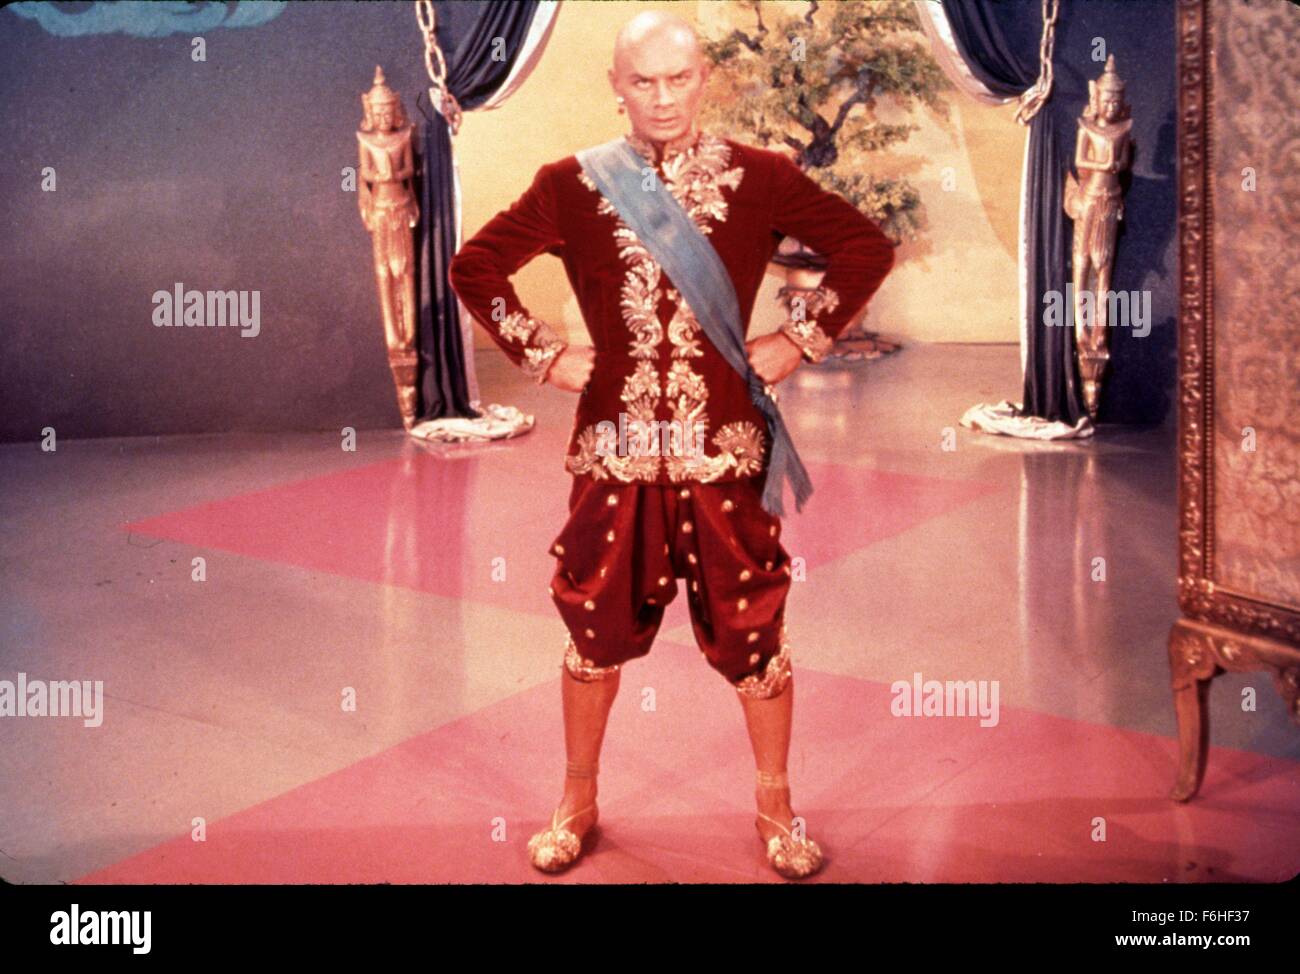 1956, Film Title: KING AND I, Director: WALTER LANG, Studio: FOX, Pictured: 1956, AWARDS - ACADEMY, BEST ACTOR, YUL BRYNNER, WALTER LANG, ROYAL, ORIENTAL, EXOTIC, BALD HEAD, GOLD, HANDS ON HIPS, MENACING, THREATENING, STERN, AUTHORITY FIGURE, KING, RULER, LEADER, OSCAR (MOVIE), RED. (Credit Image: SNAP) Stock Photo